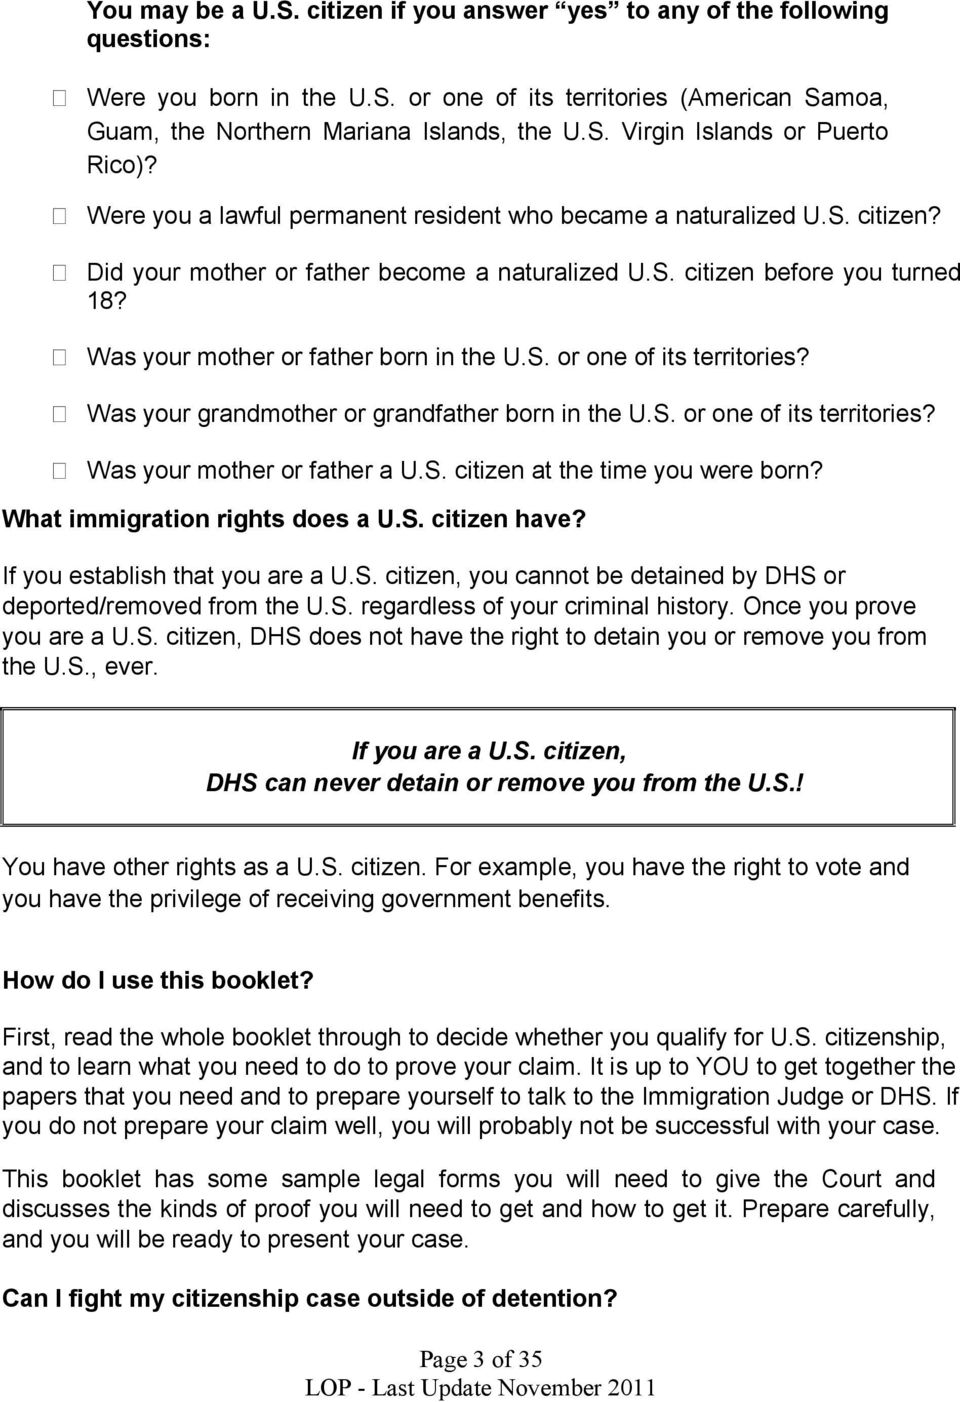 Was your grandmother or grandfather born in the U.S. or one of its territories? Was your mother or father a U.S. citizen at the time you were born? What immigration rights does a U.S. citizen have?